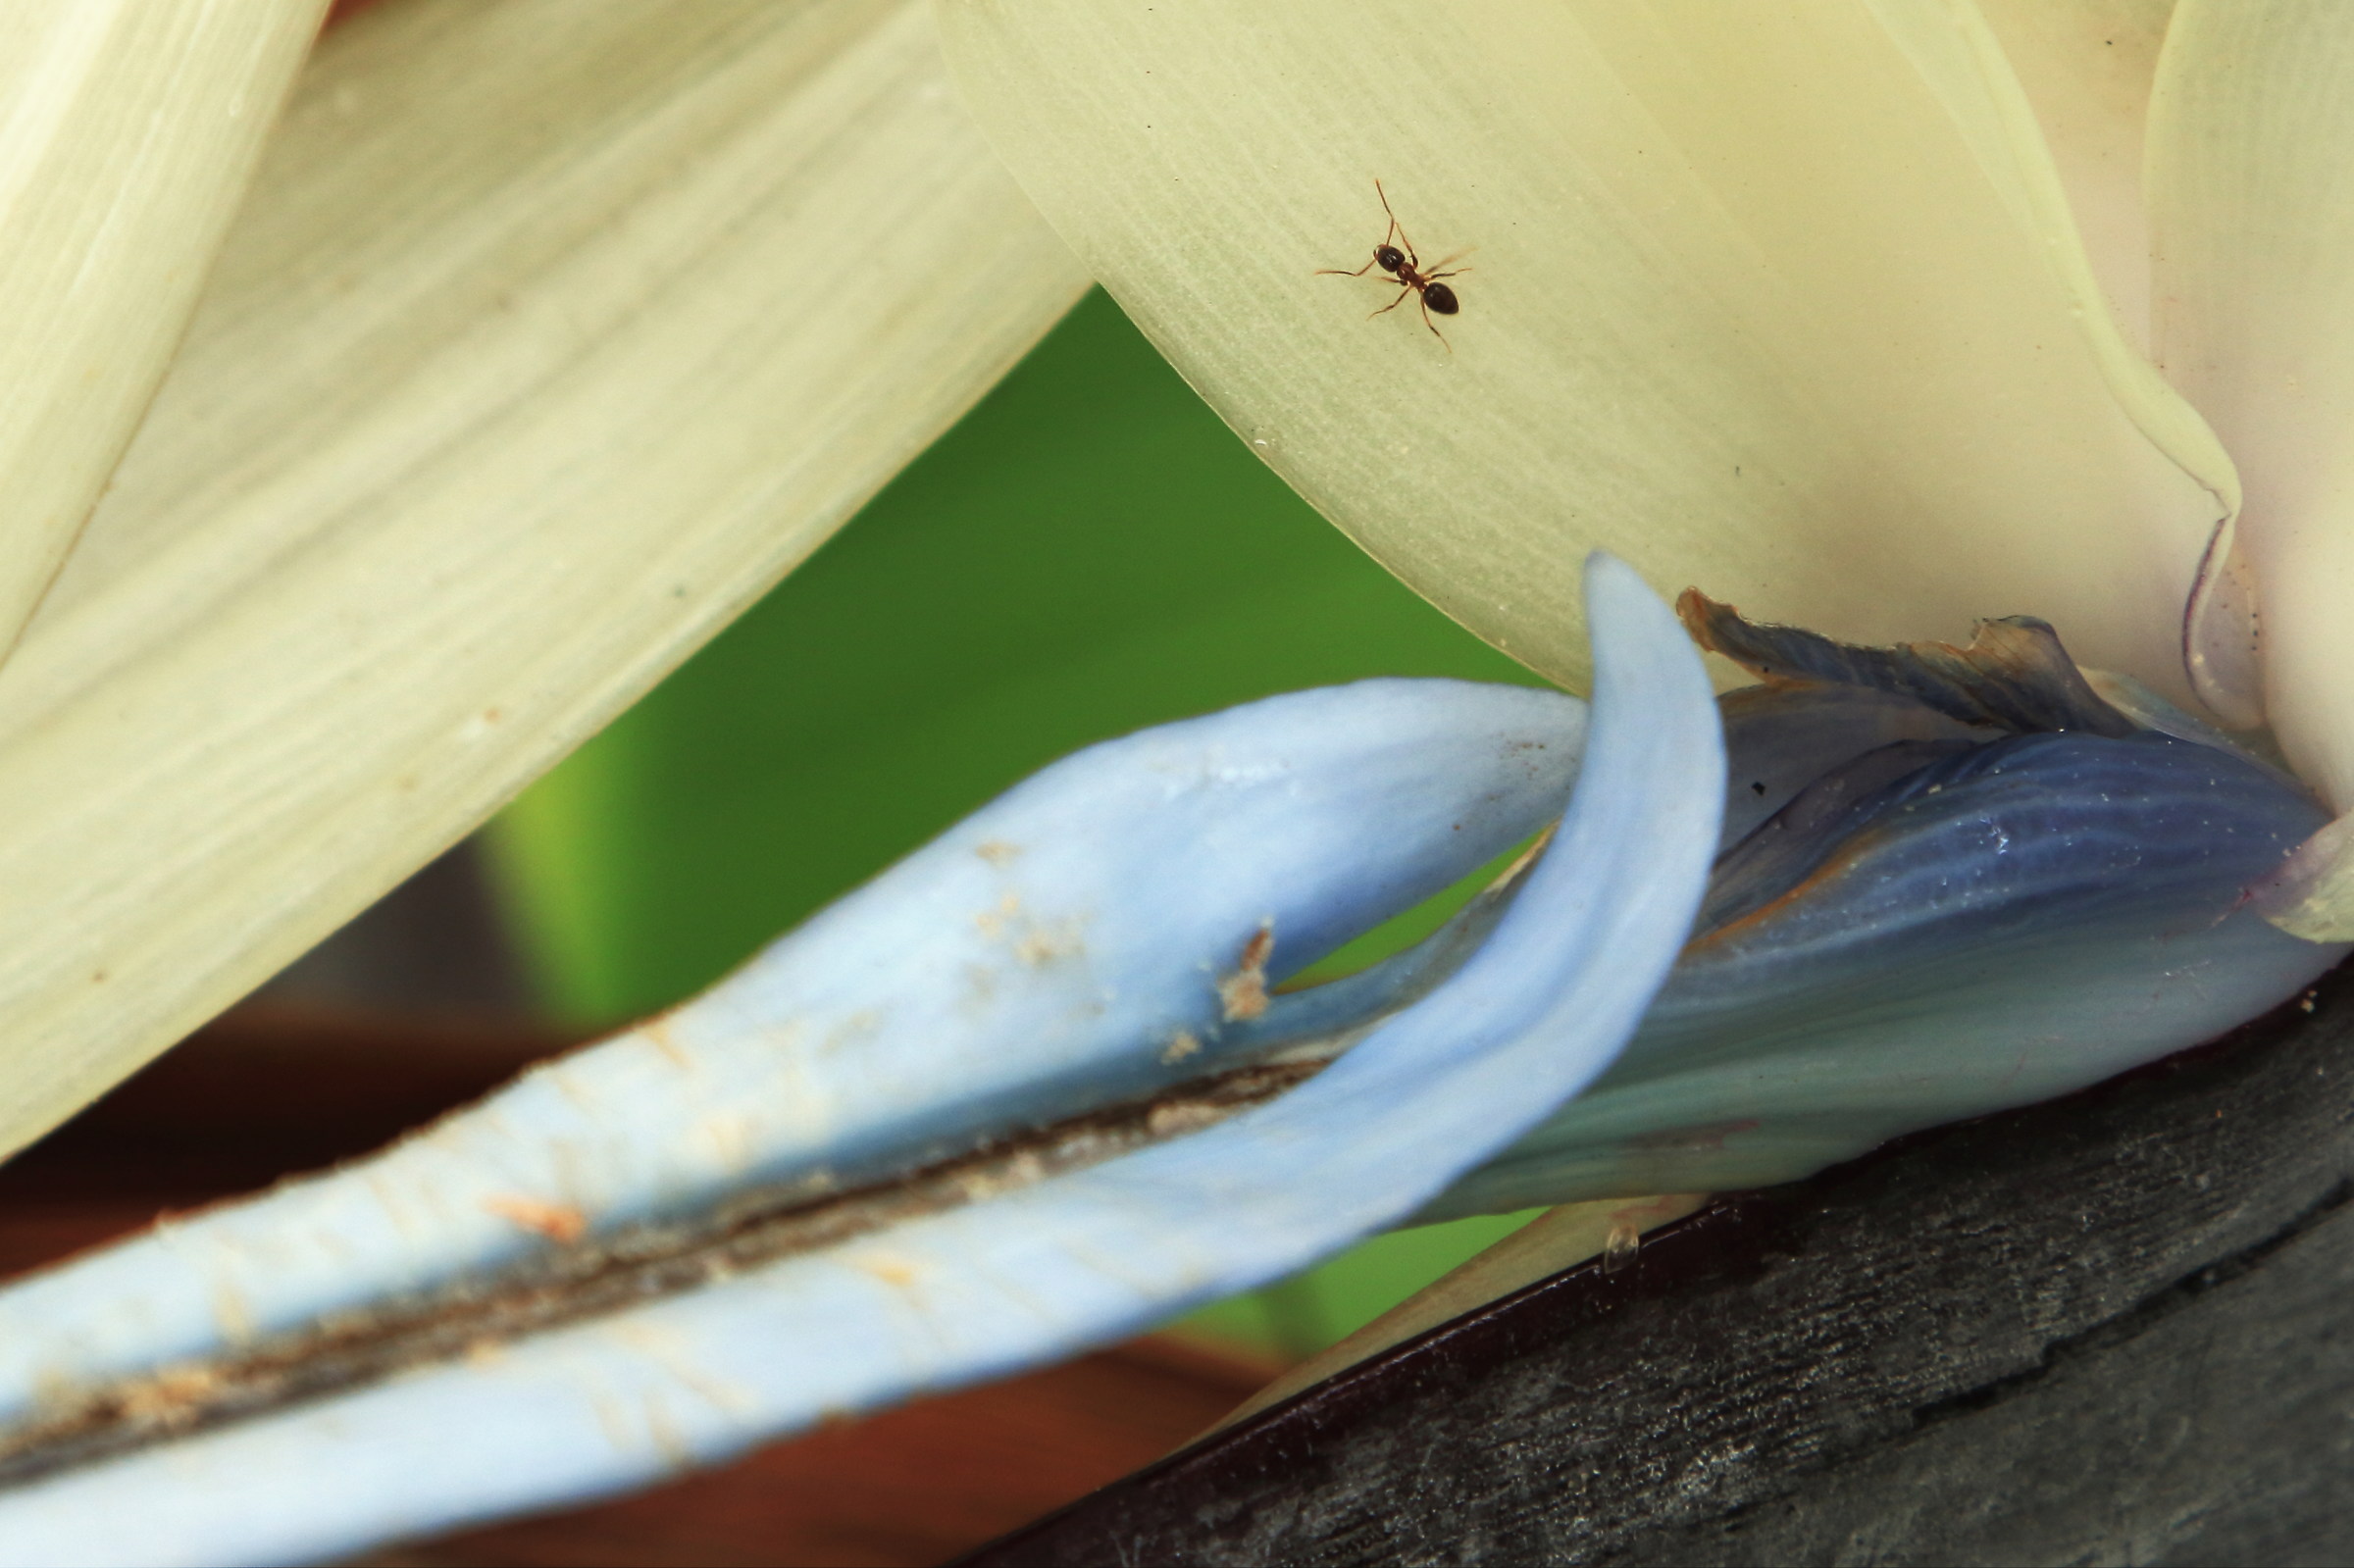 Small guest in banana flower...